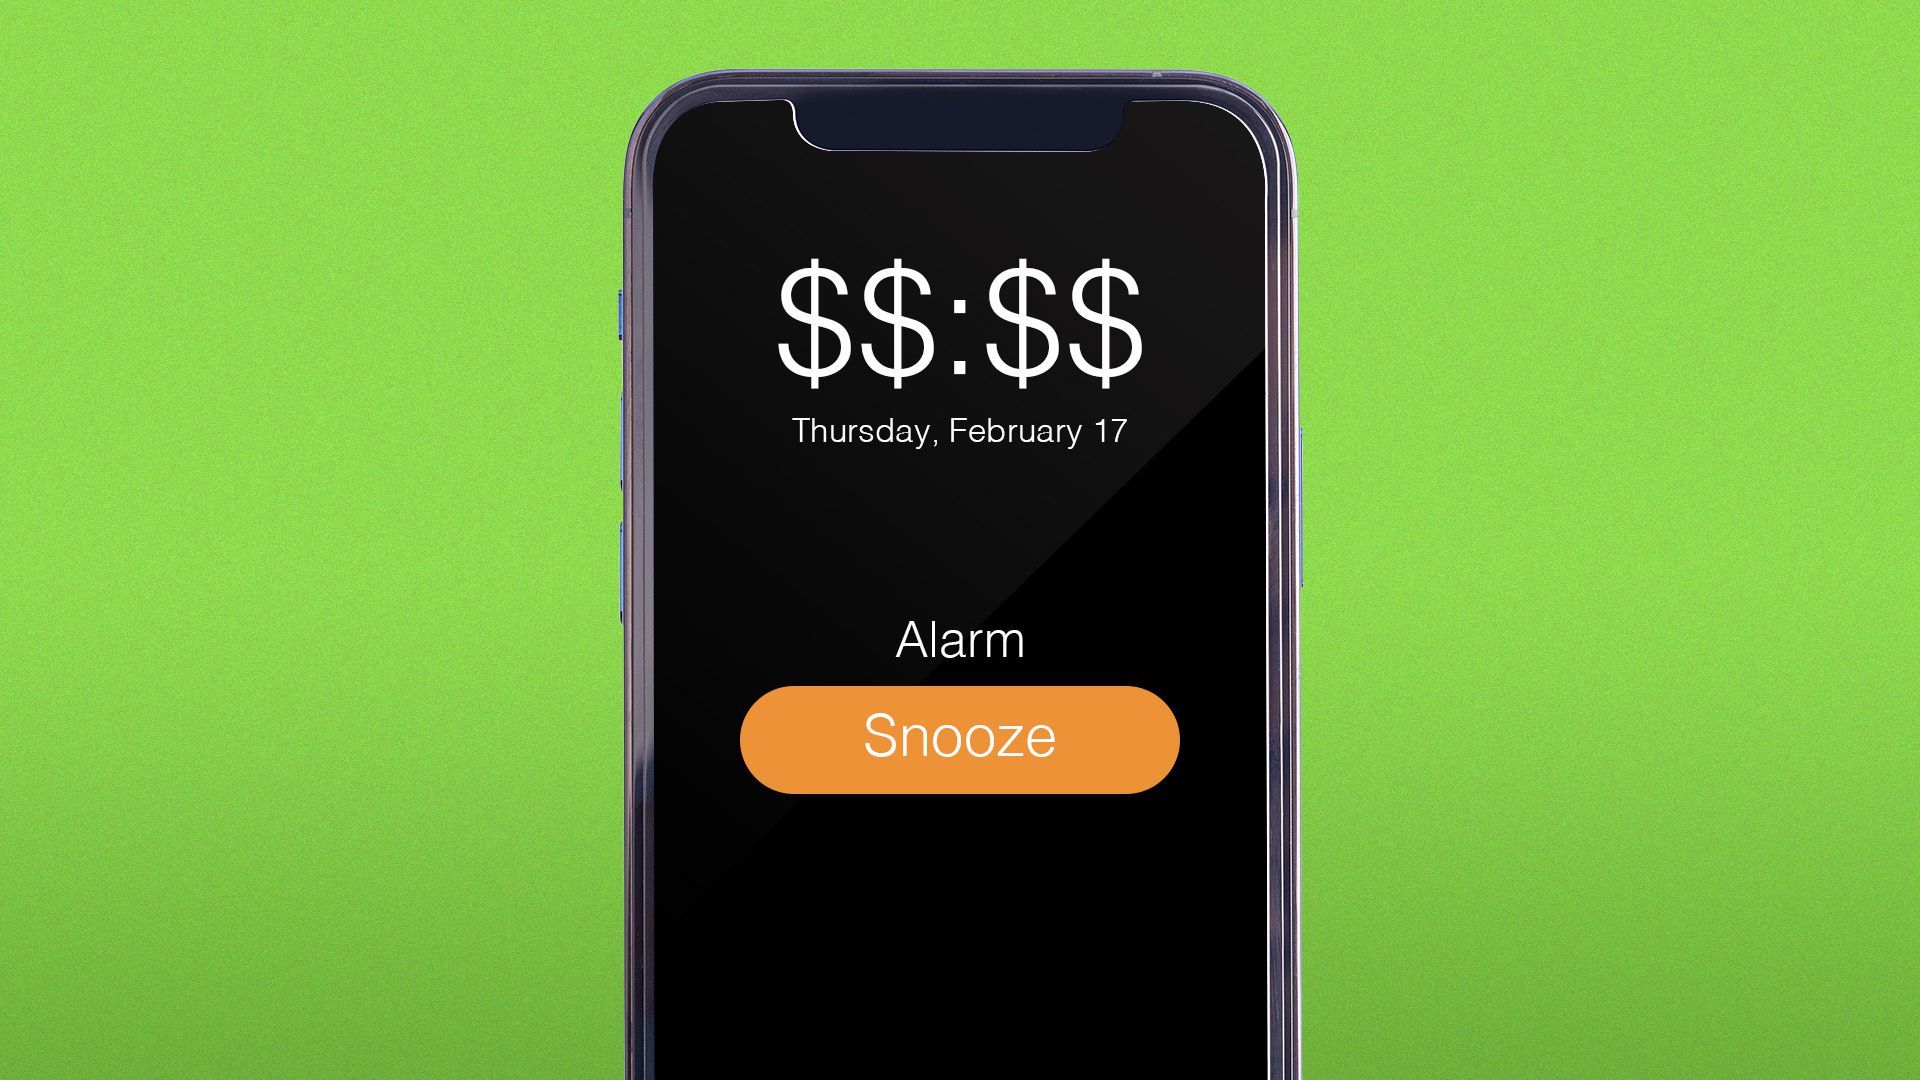 Illustration of an iPhone displaying the time "$$:$$" and an alarm snooze button.